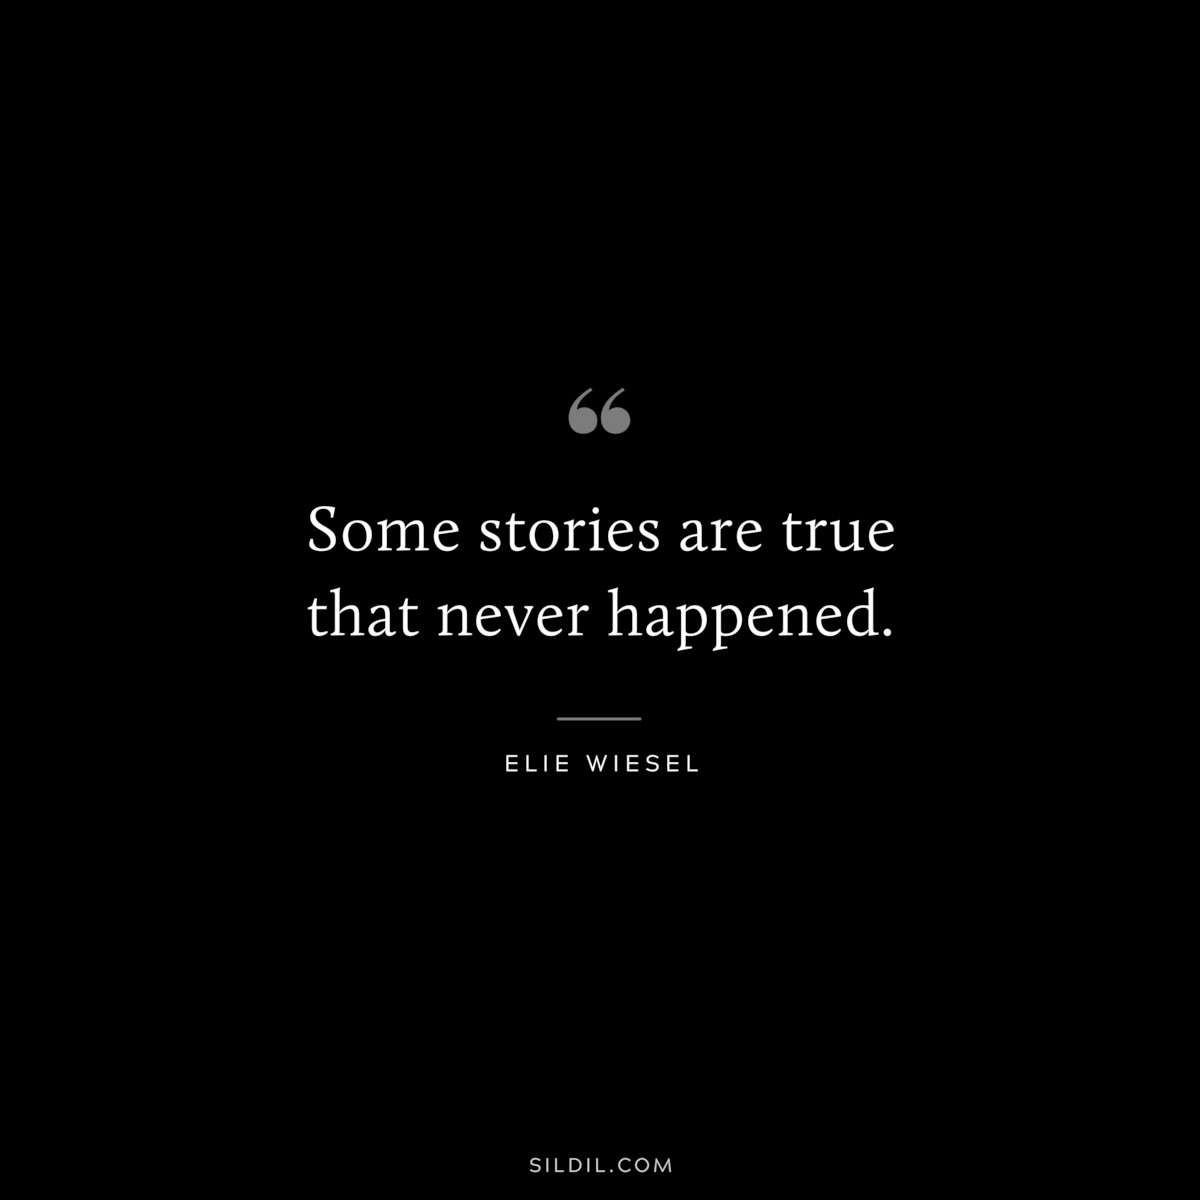 Some stories are true that never happened. ― Elie Wiesel